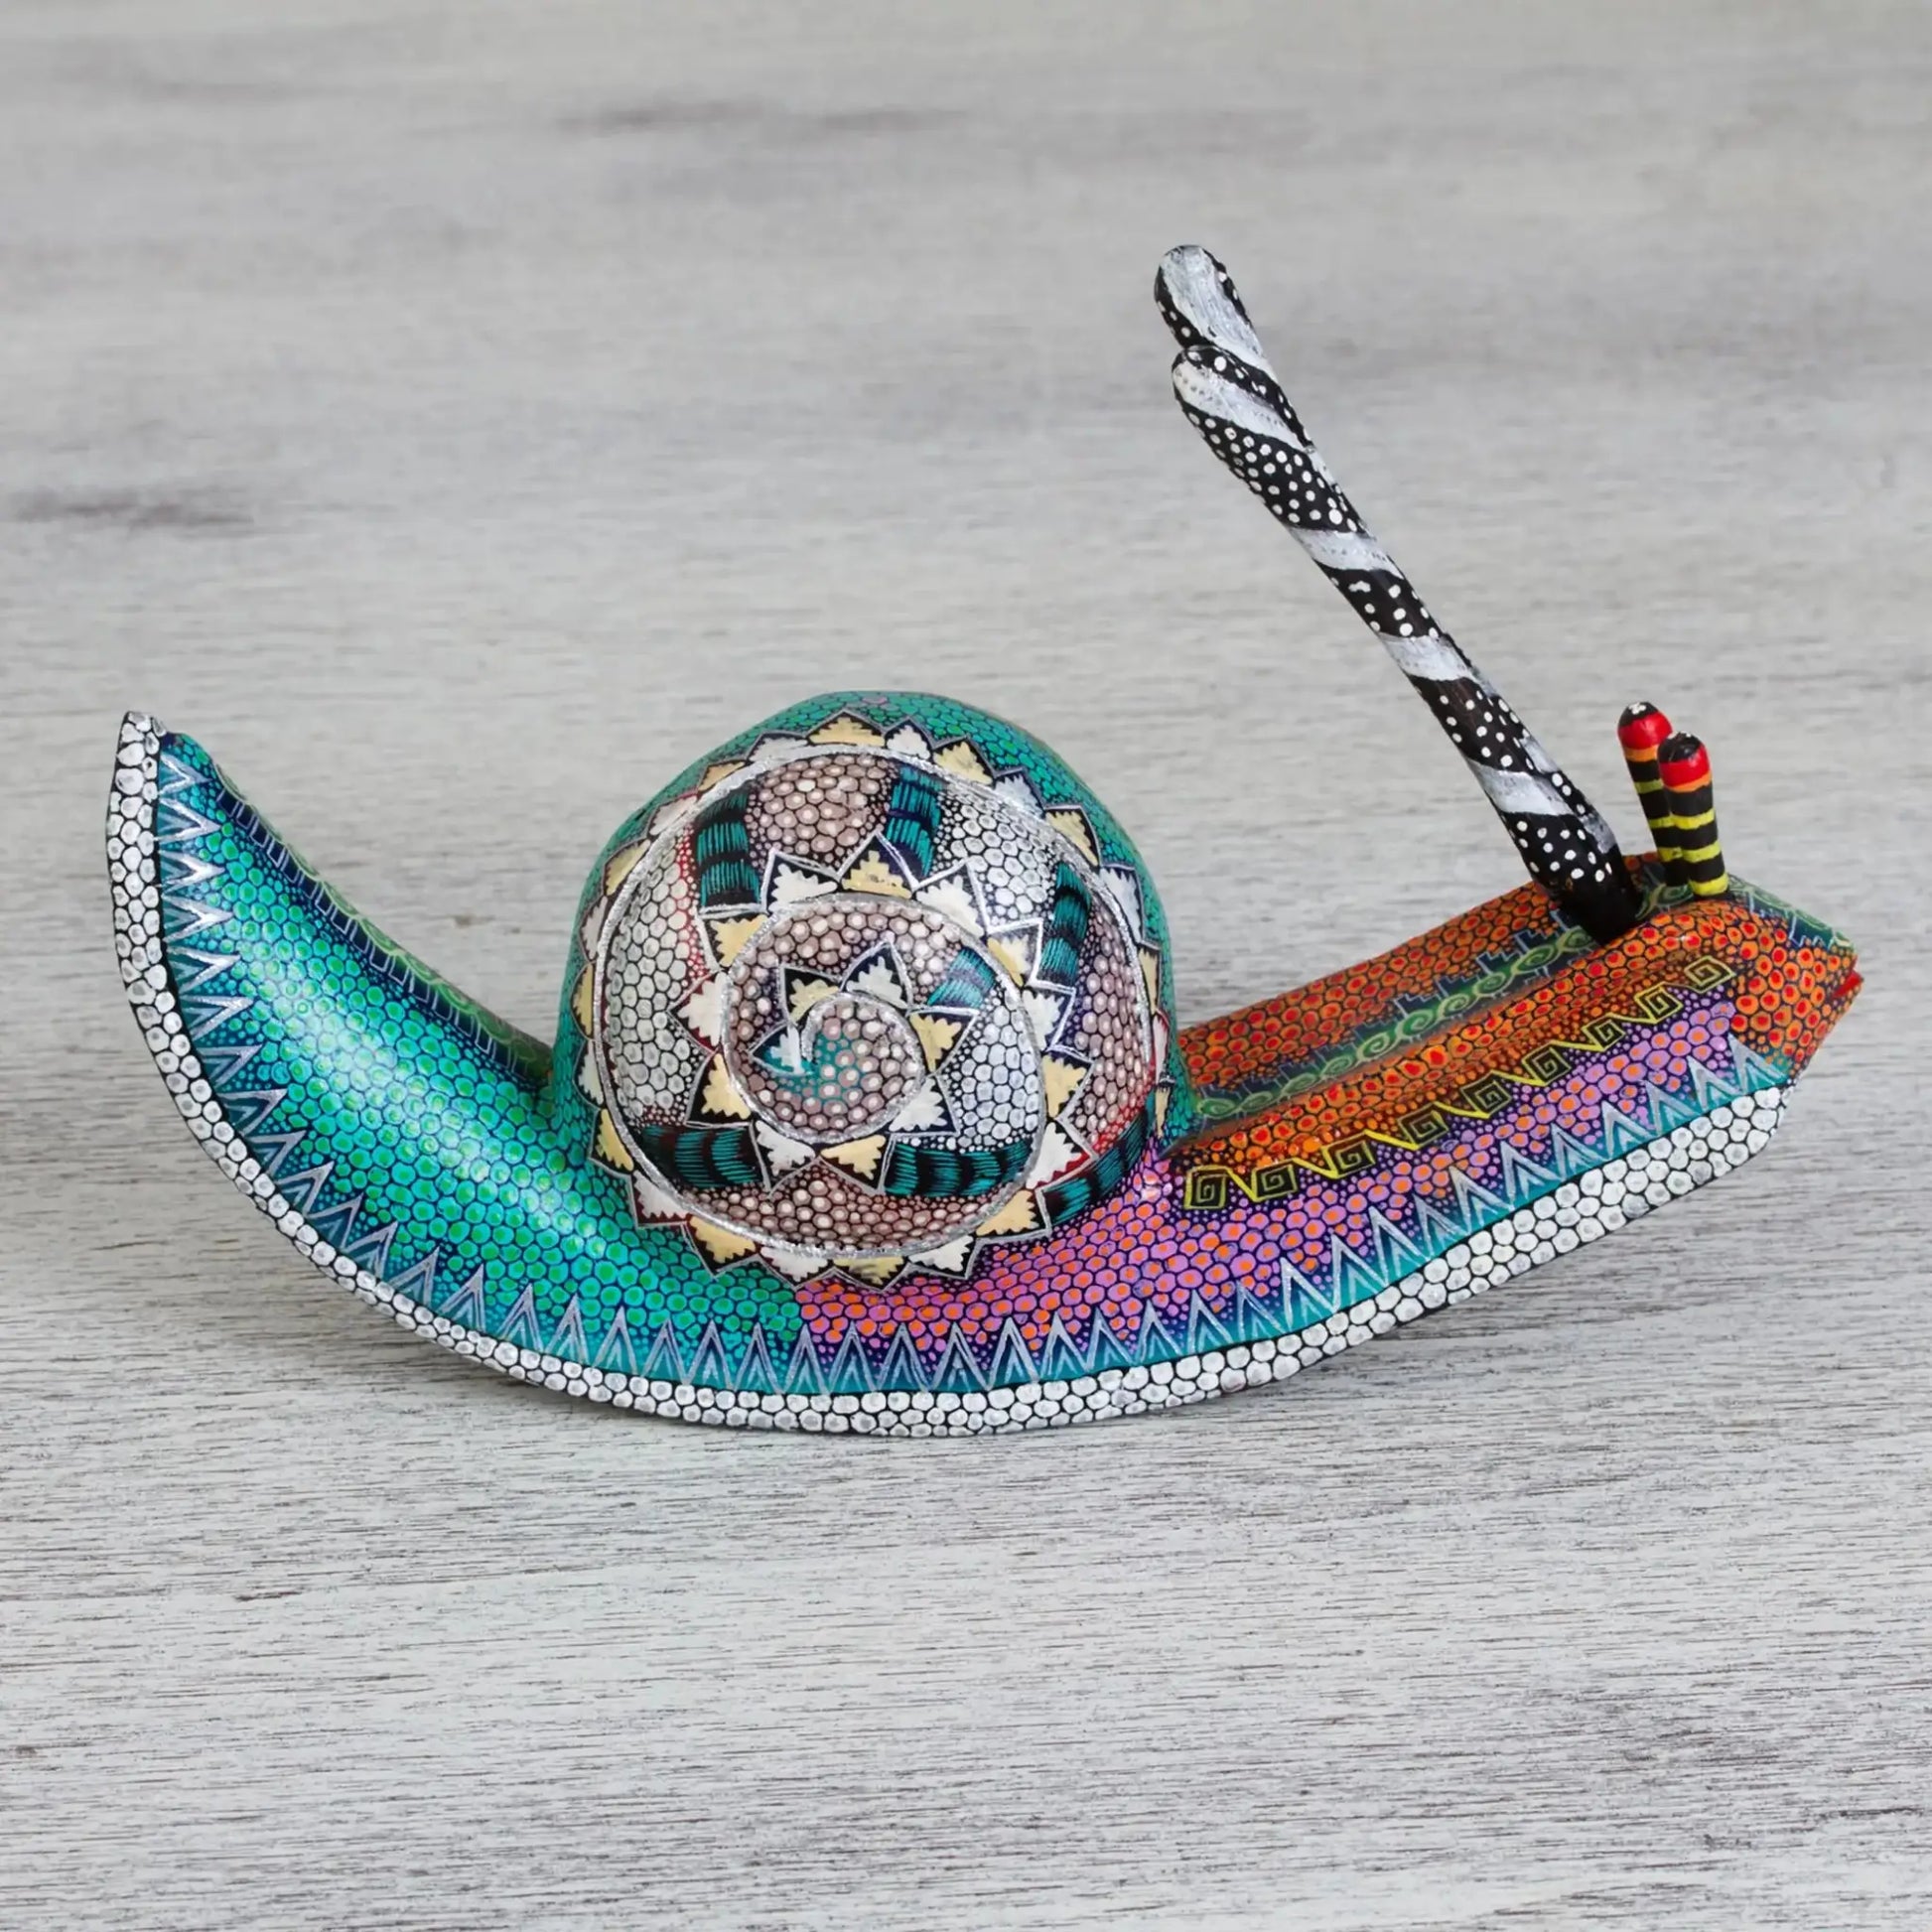 Vibrant Snail - Hand-Painted Alebrije Wood Sculpture from